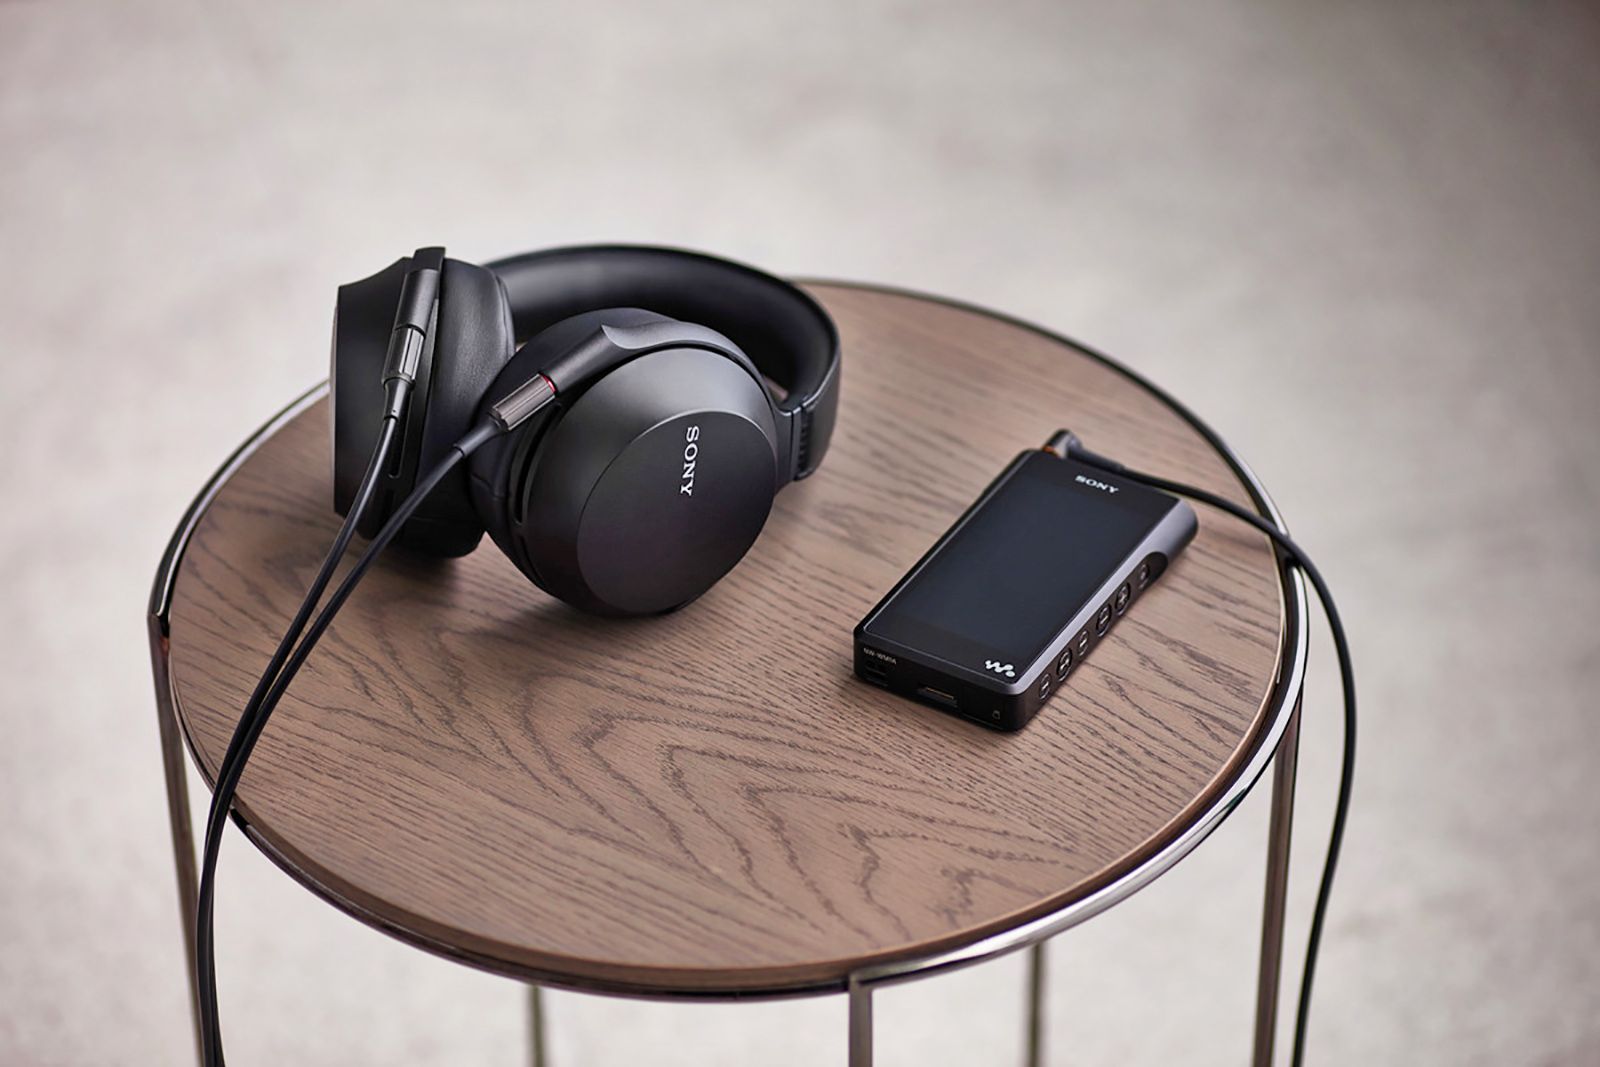 Sony MDR-Z7M2 may be some of the finest closed-back headphones you can buy image 1